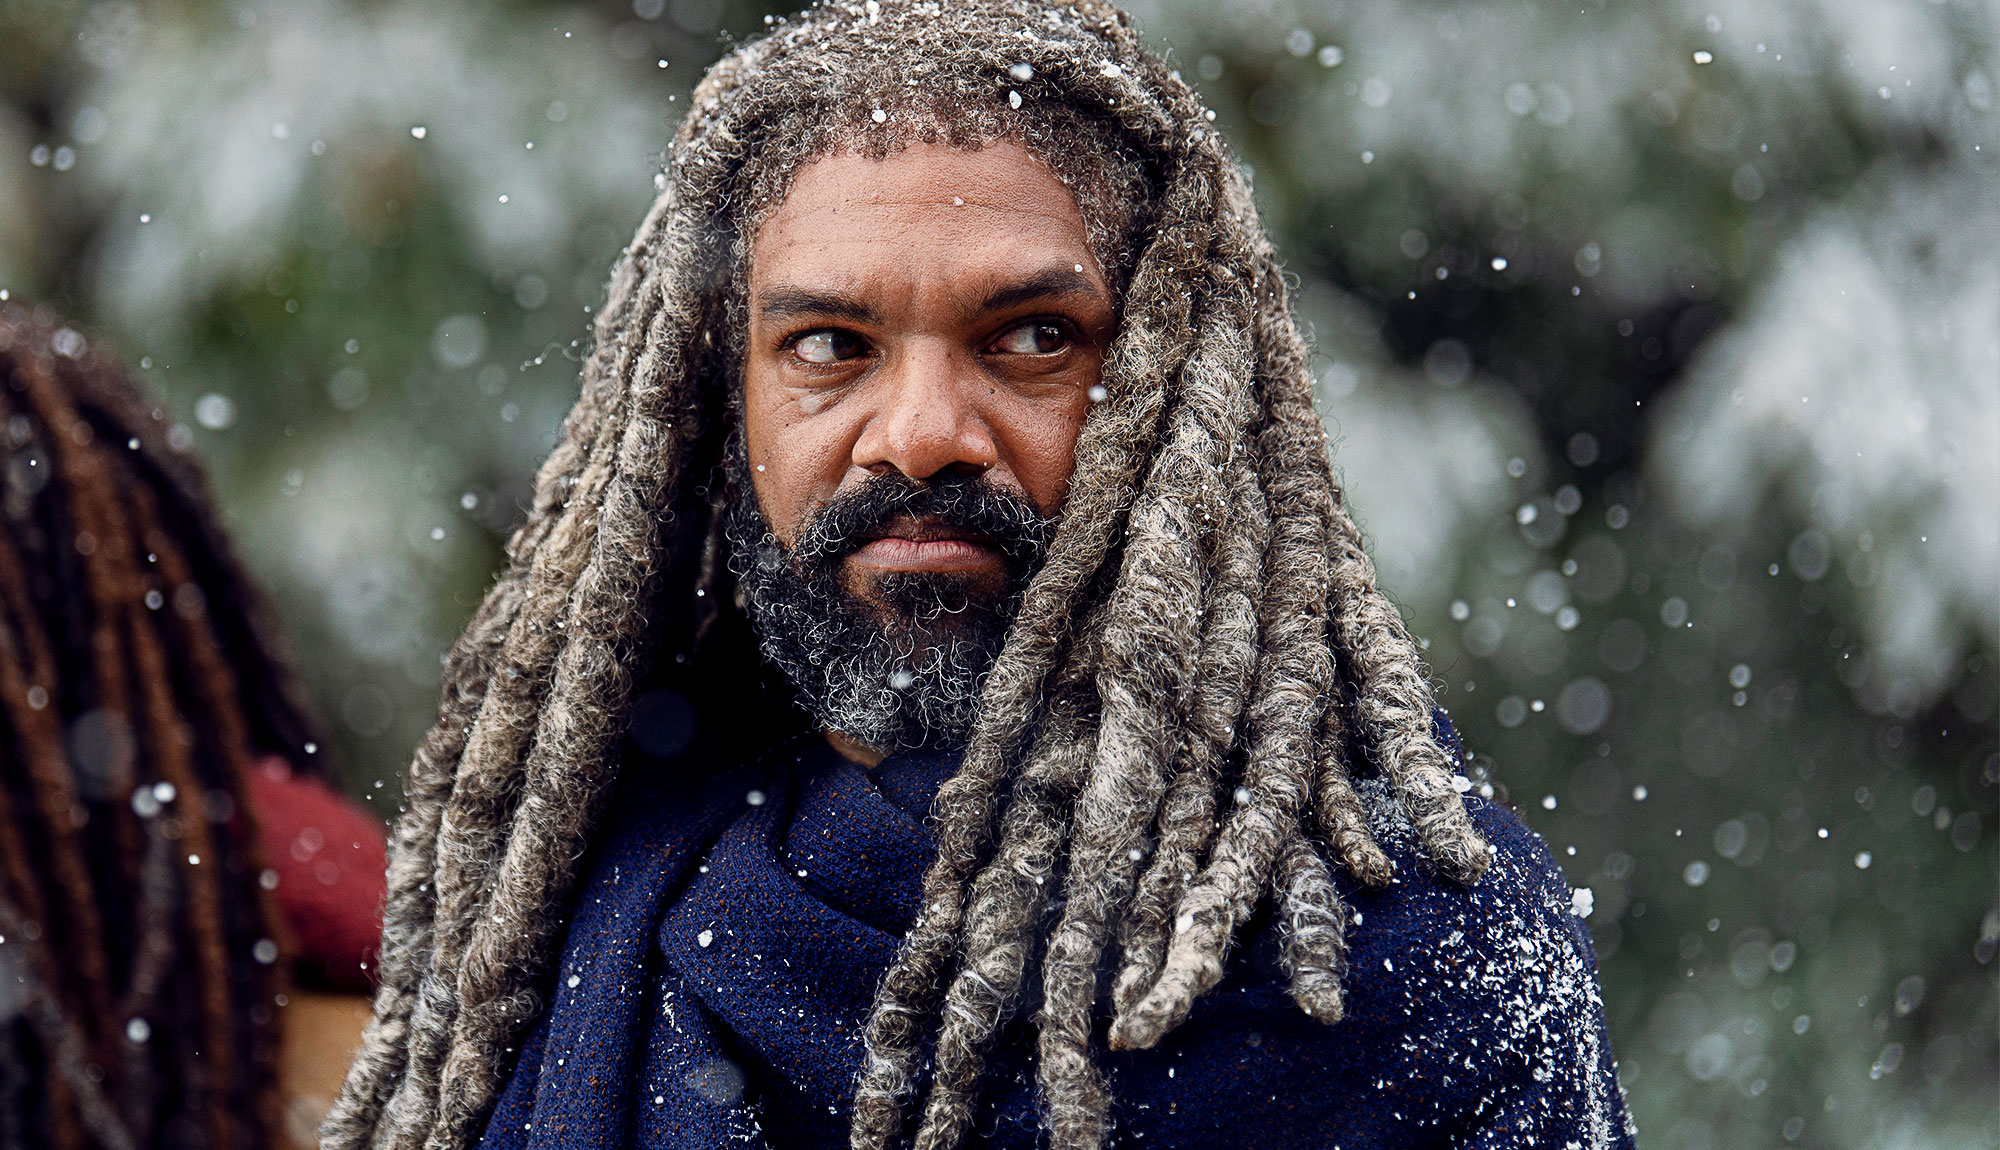 Winter Finally Comes To The Walking Dead In These Season Finale Images